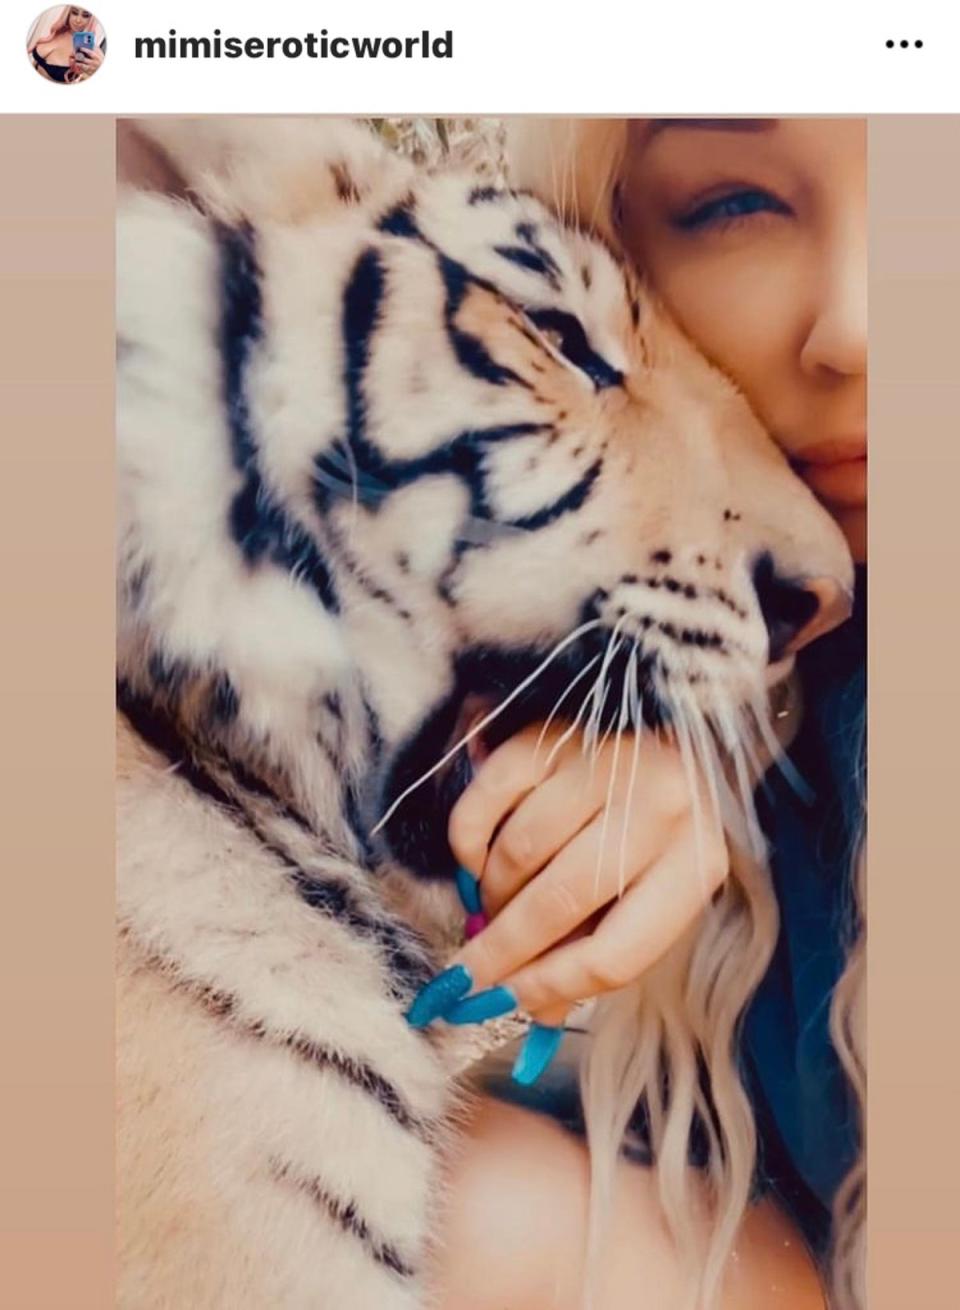 In 2016, Meyer was found to have animals including a cougar, a skunk, monkeys, three tiger cubs and a large adult male tiger in her Houston home (Instagram/mimiseroticworld)